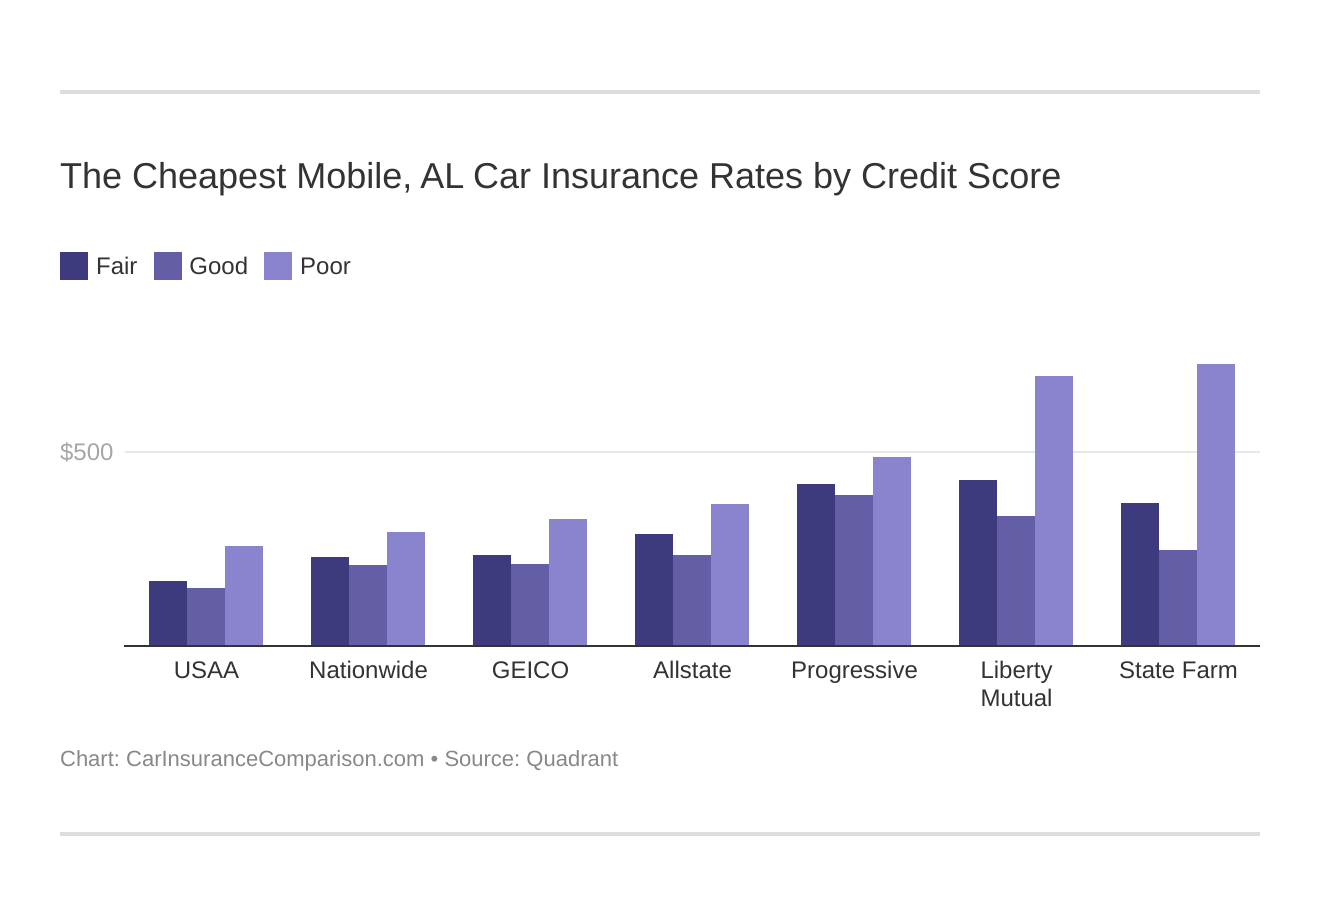 The Cheapest Mobile, AL Car Insurance Rates by Credit Score